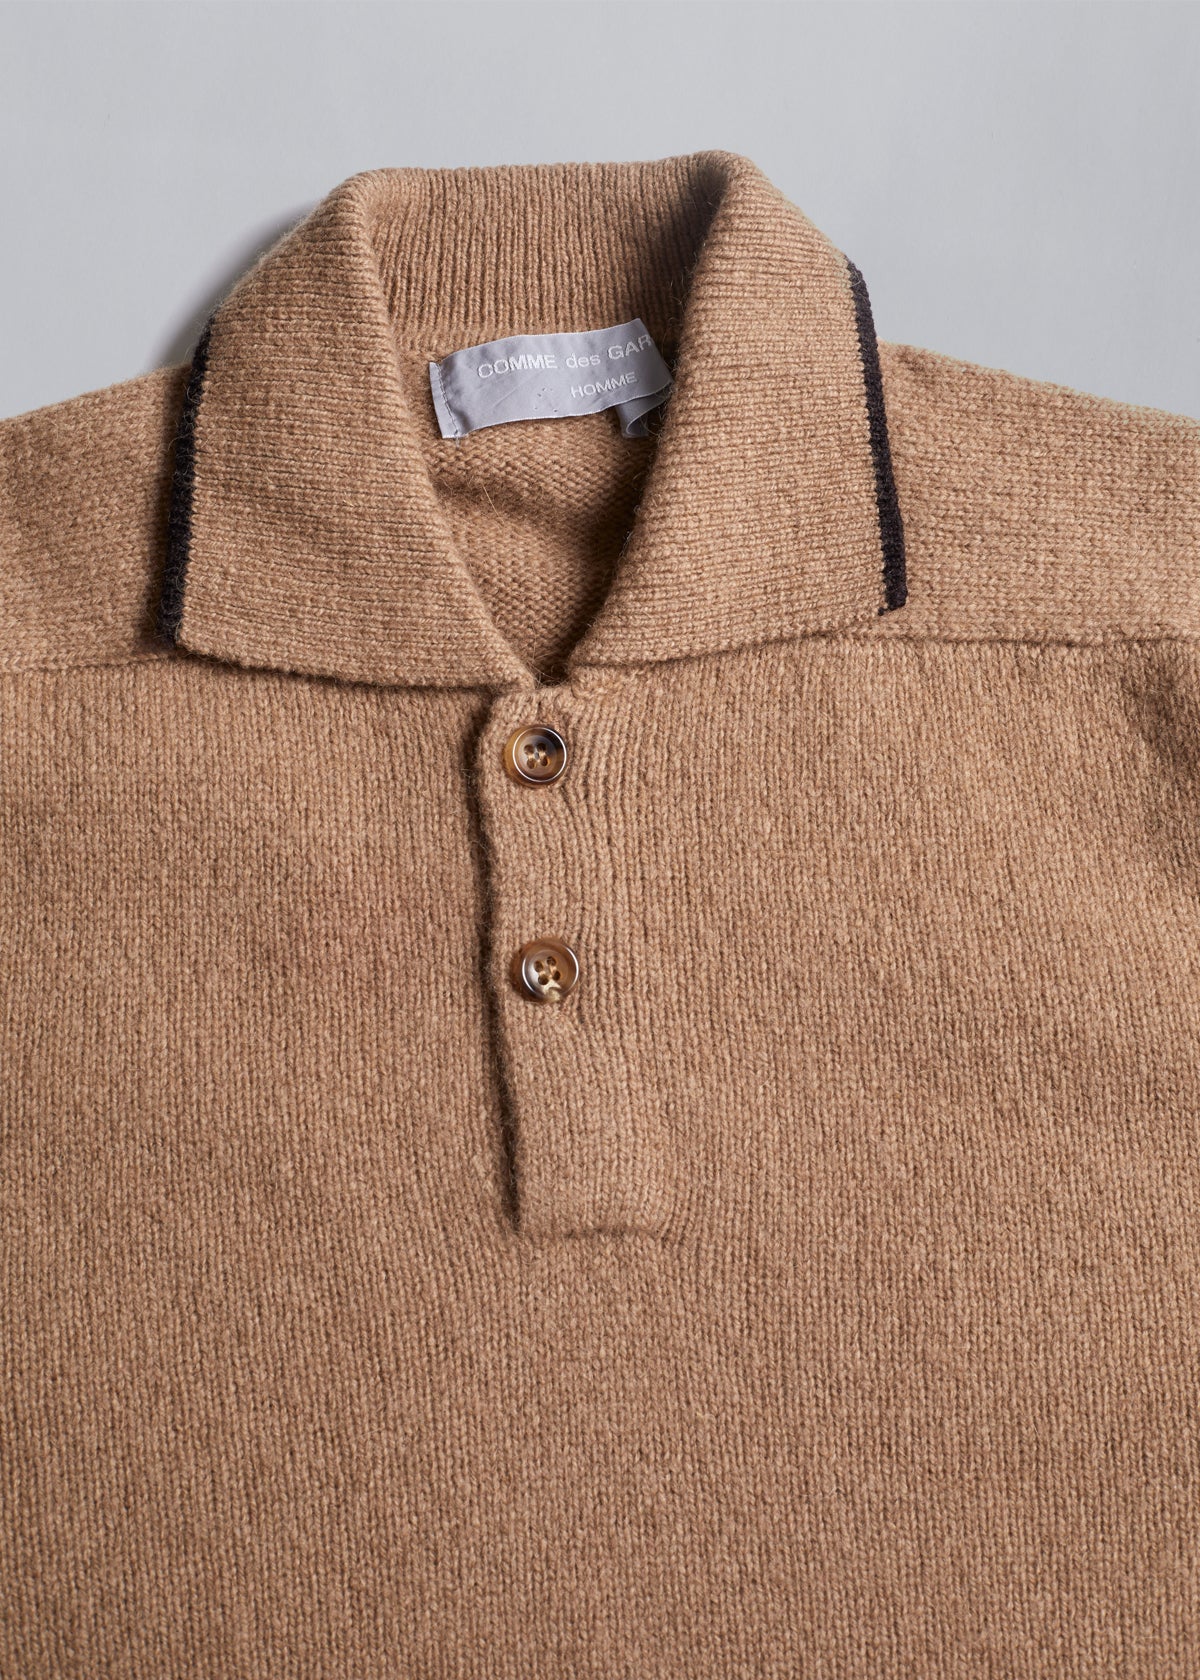 CDGH Camel Wool Knitted Polo 1980's - Large - The Archivist Store